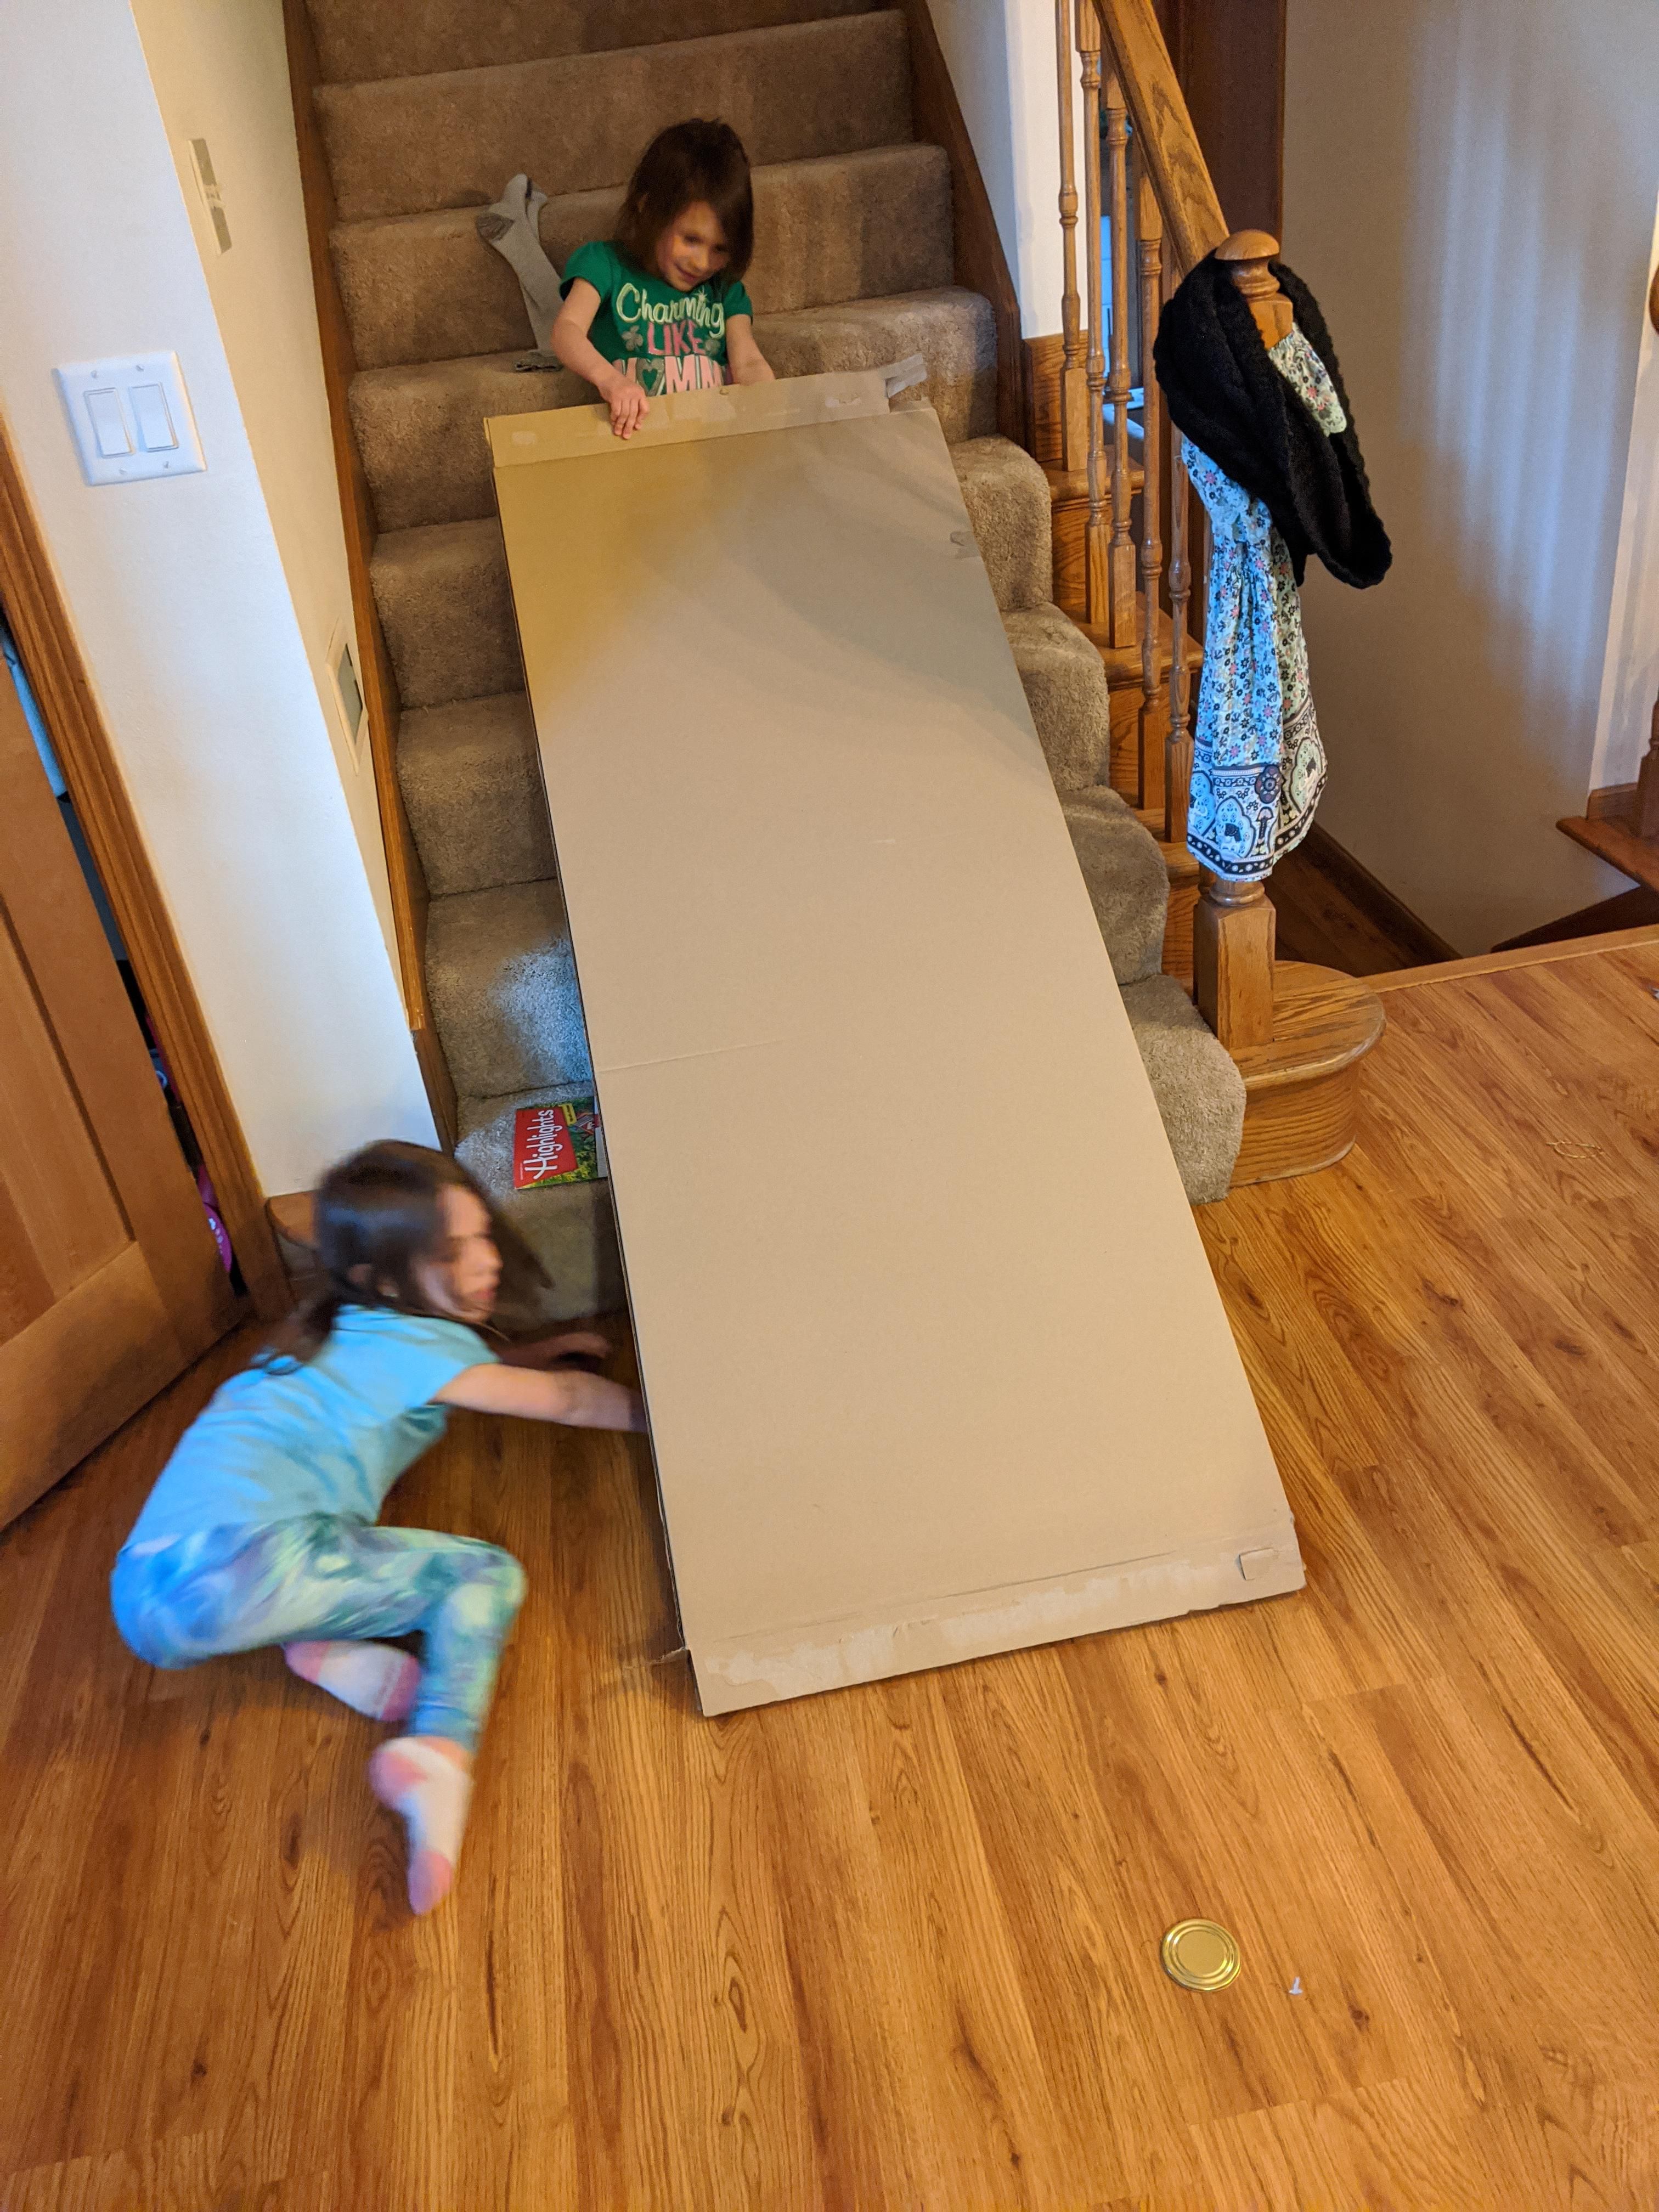 I'm regretting panic buying $100 worth of Legos to end up with my children ignoring them and instead playing with a cardboard box and a can lid for the last 2 hours.